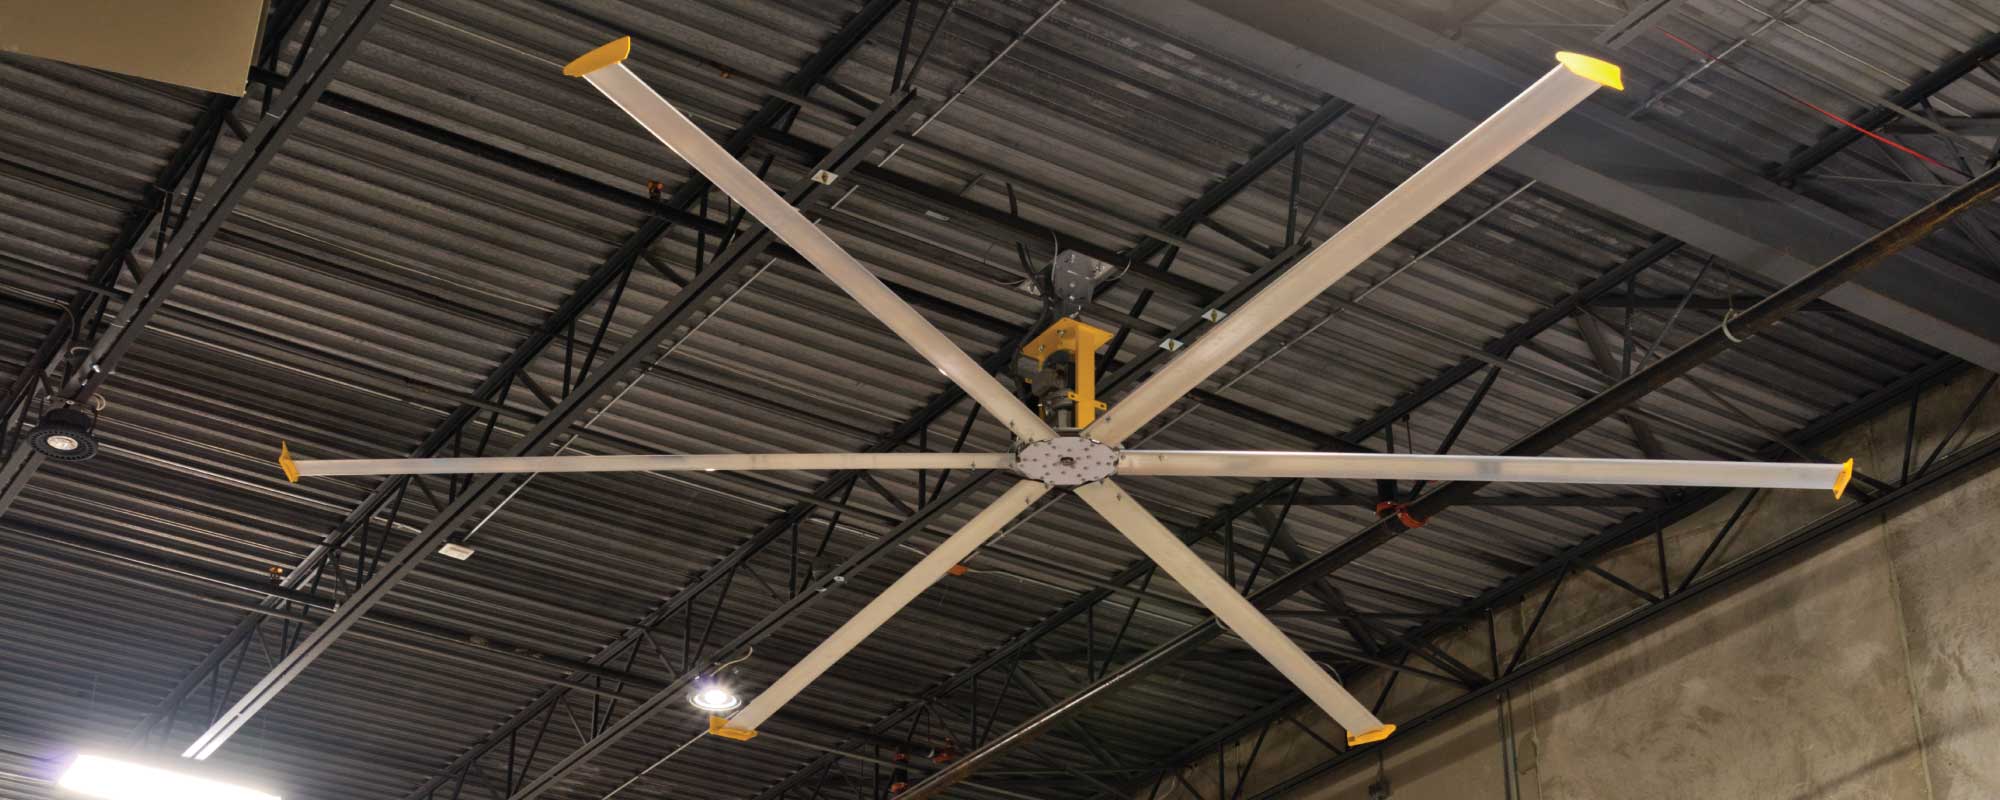 High Volume Ceiling Fans #keepProtocol